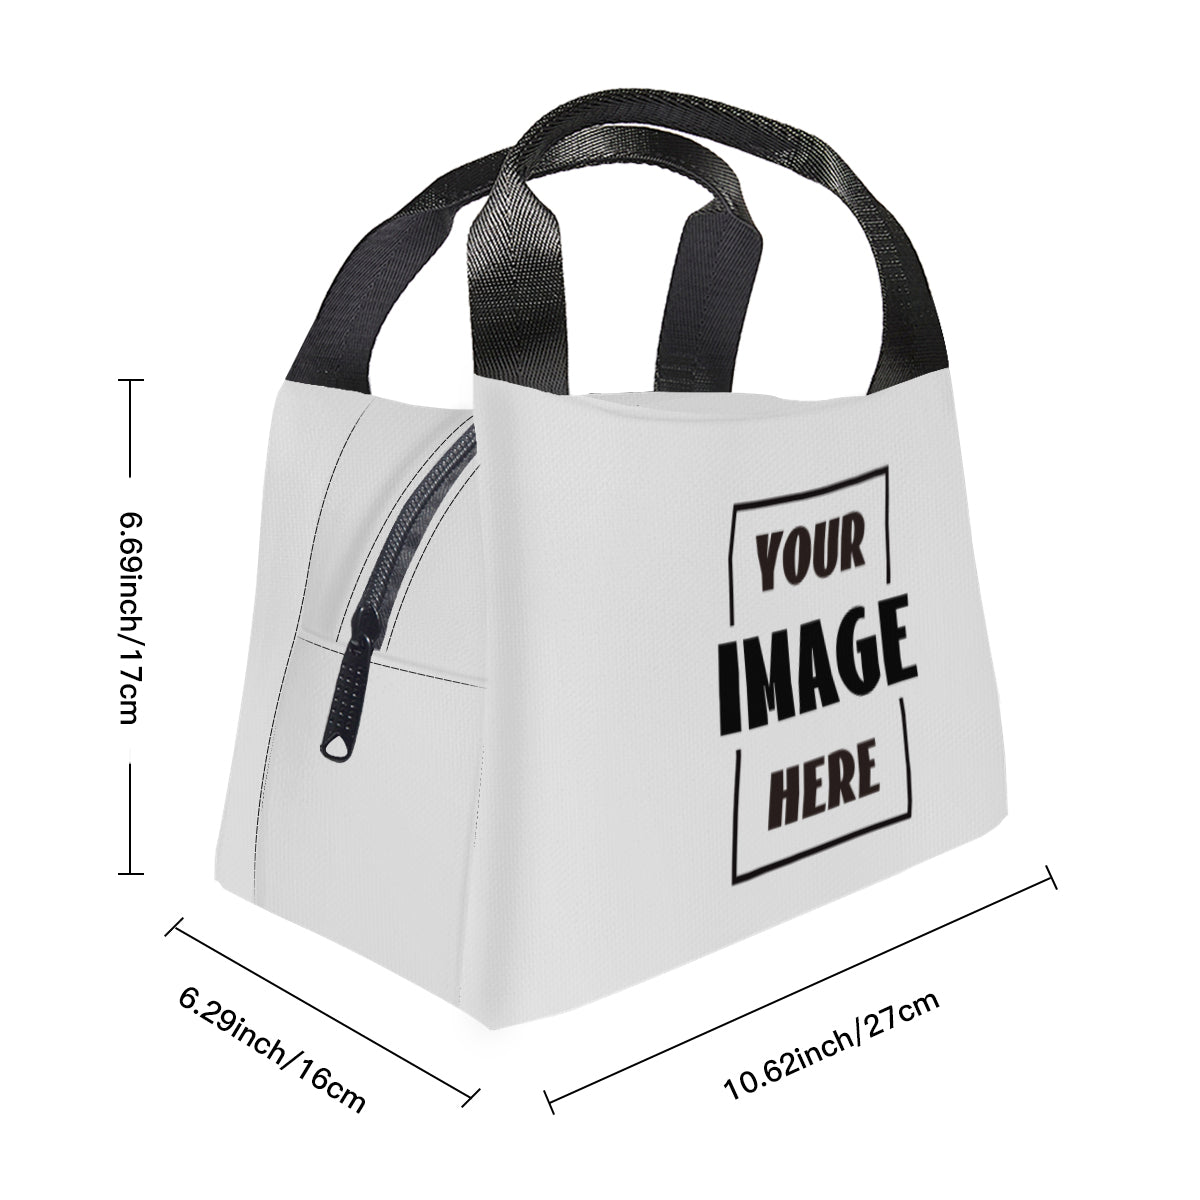 This insulated bag is 10.62 inch long, 6.29 inch wide, and 6.69 inch high.